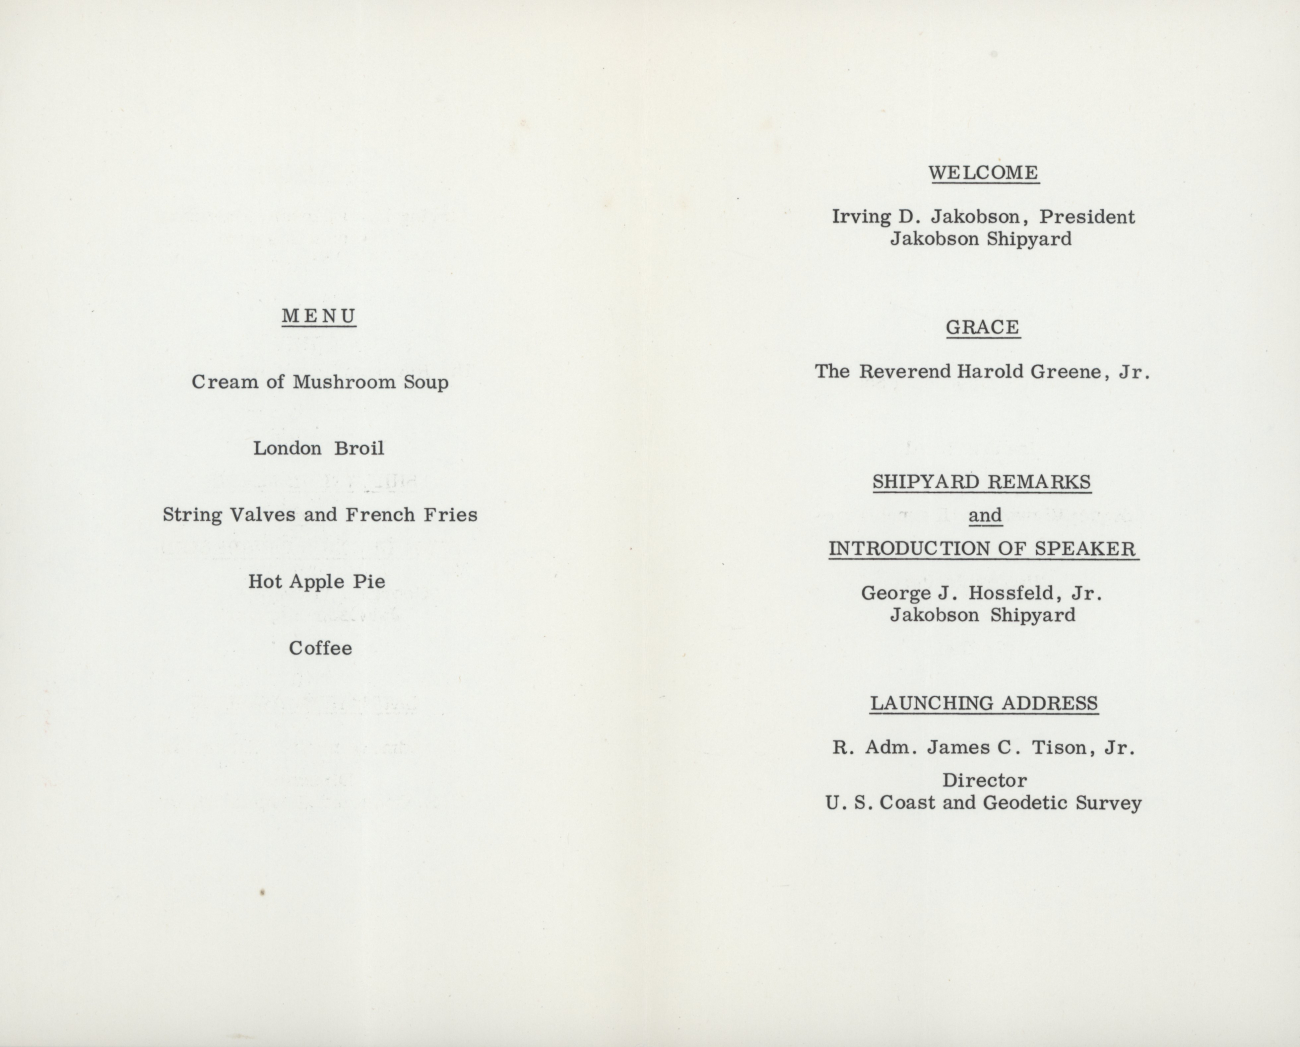 Program for the launching of the USC&GS; Ship HECK on November 1, 1966